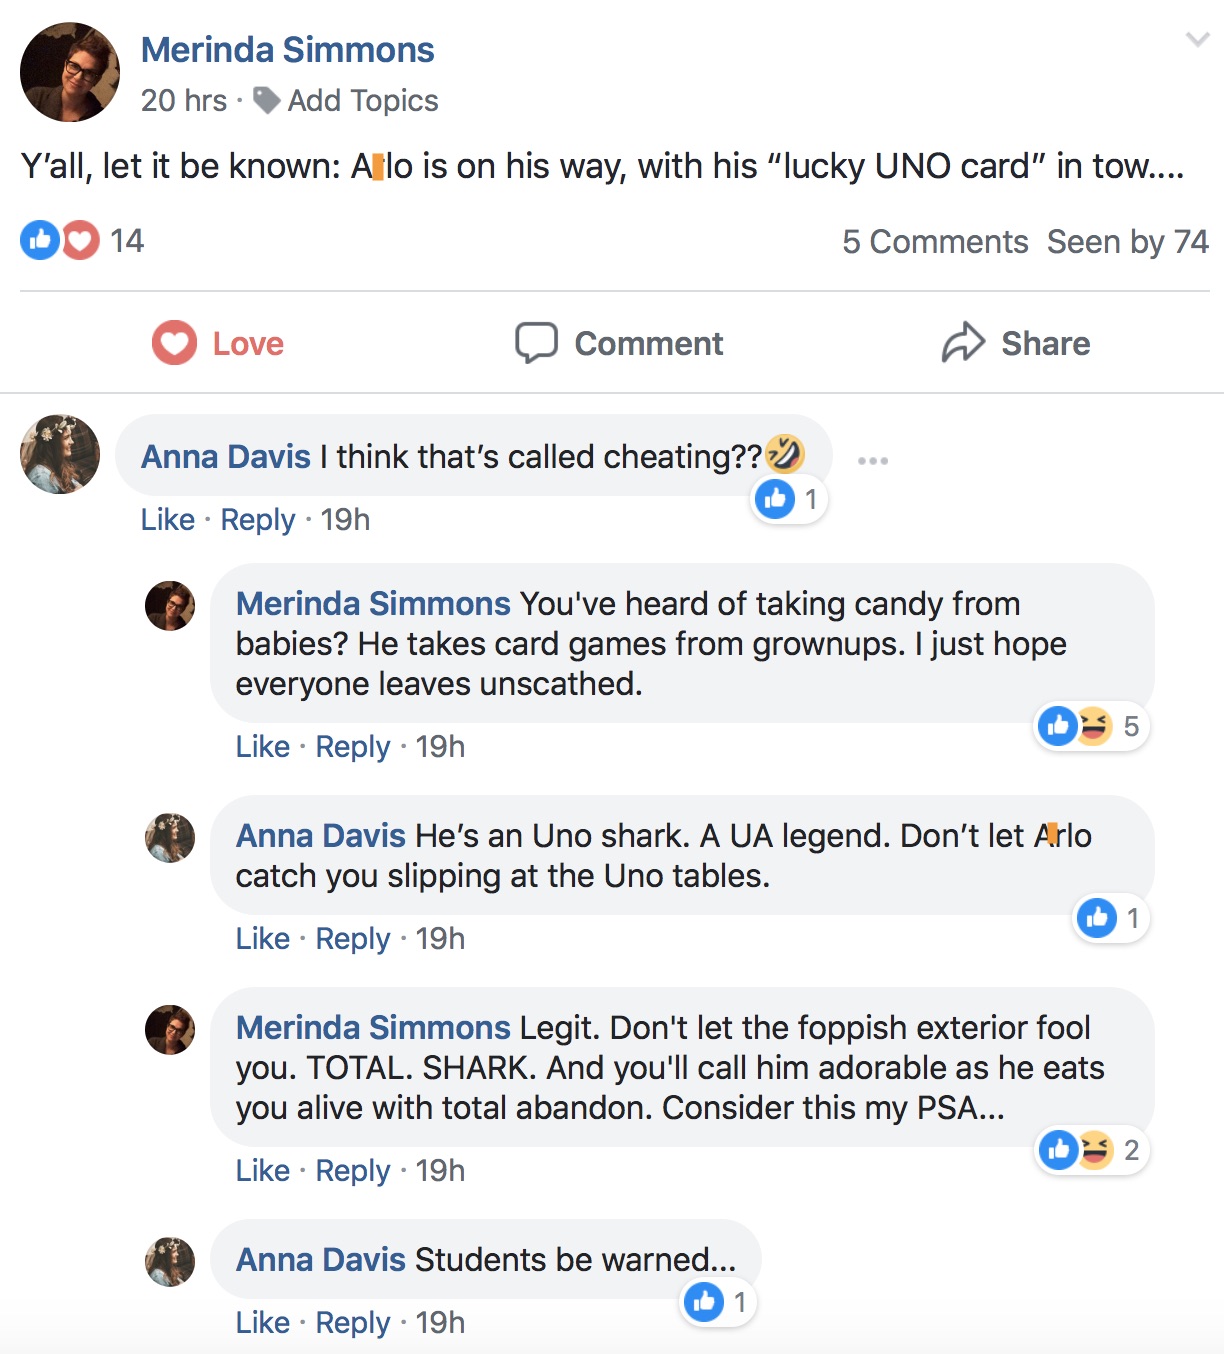 A Facebook conversation on the coming of "A-lo" and his lucky UNO card in tow." Another person replies that A-lo is a UA legend and a card shark.